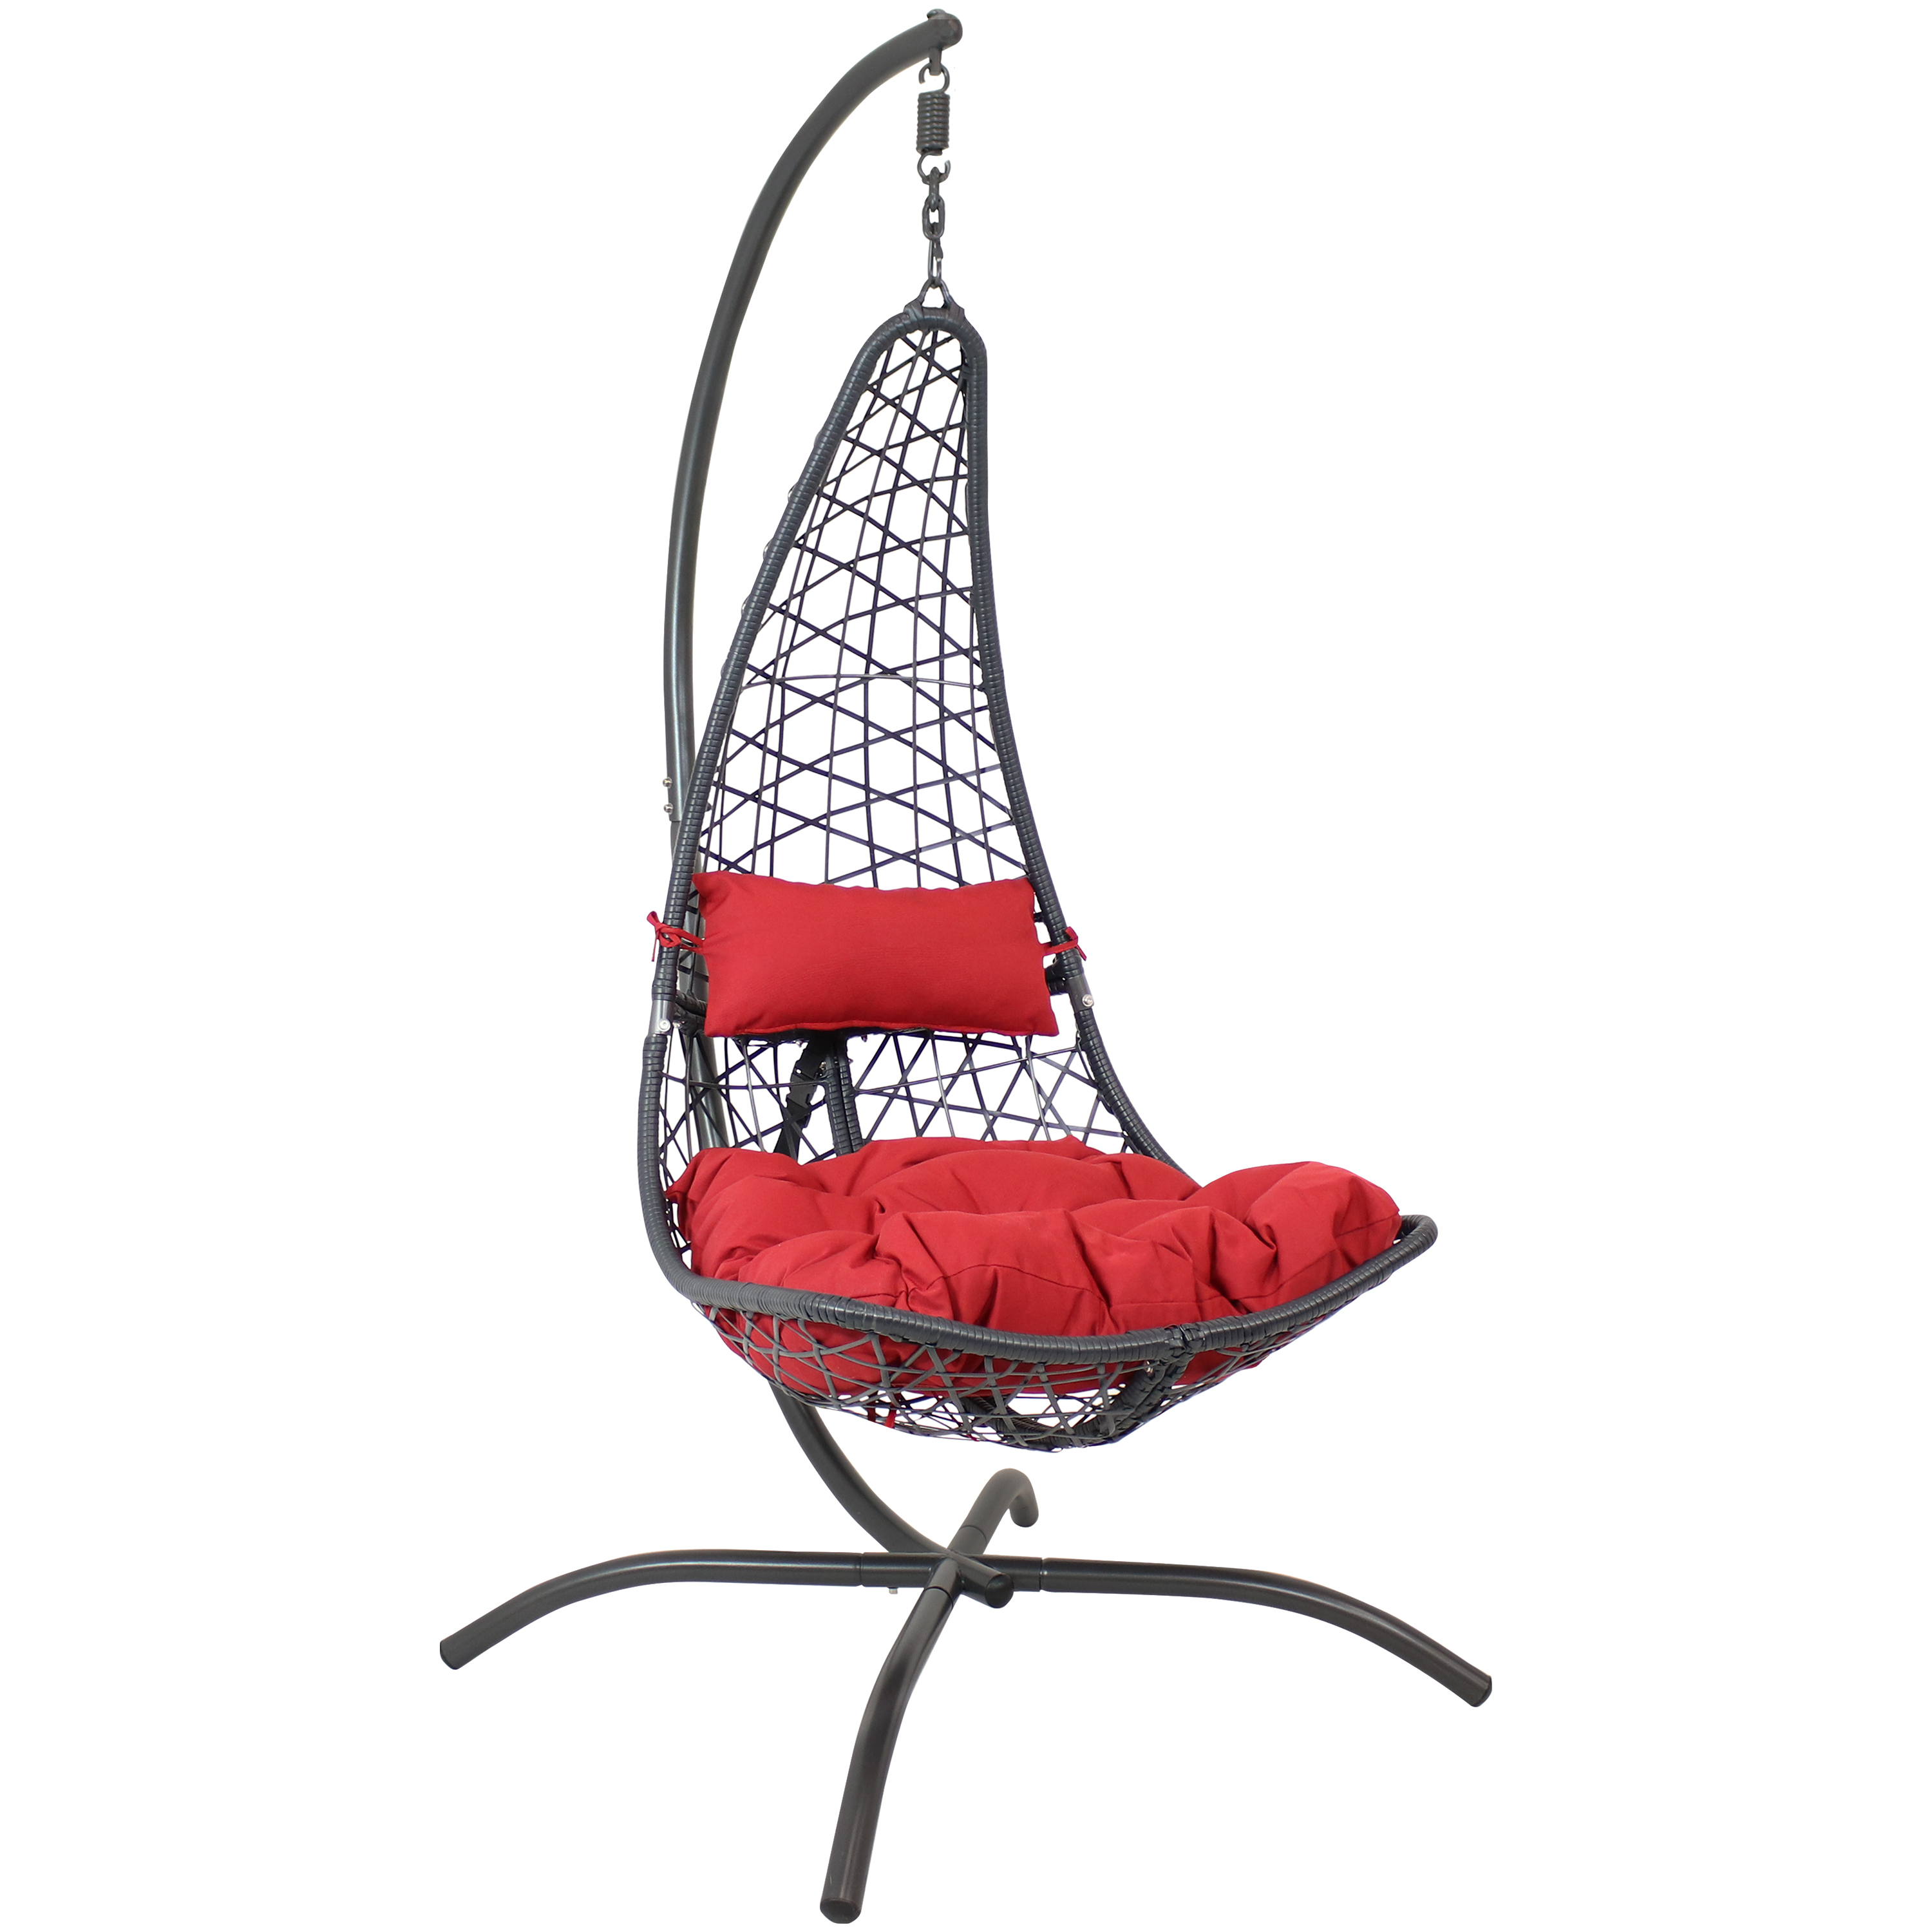 Sunnydaze Phoebe Hanging Egg Chair with Stand and Seat Cushions - Red - image 1 of 10